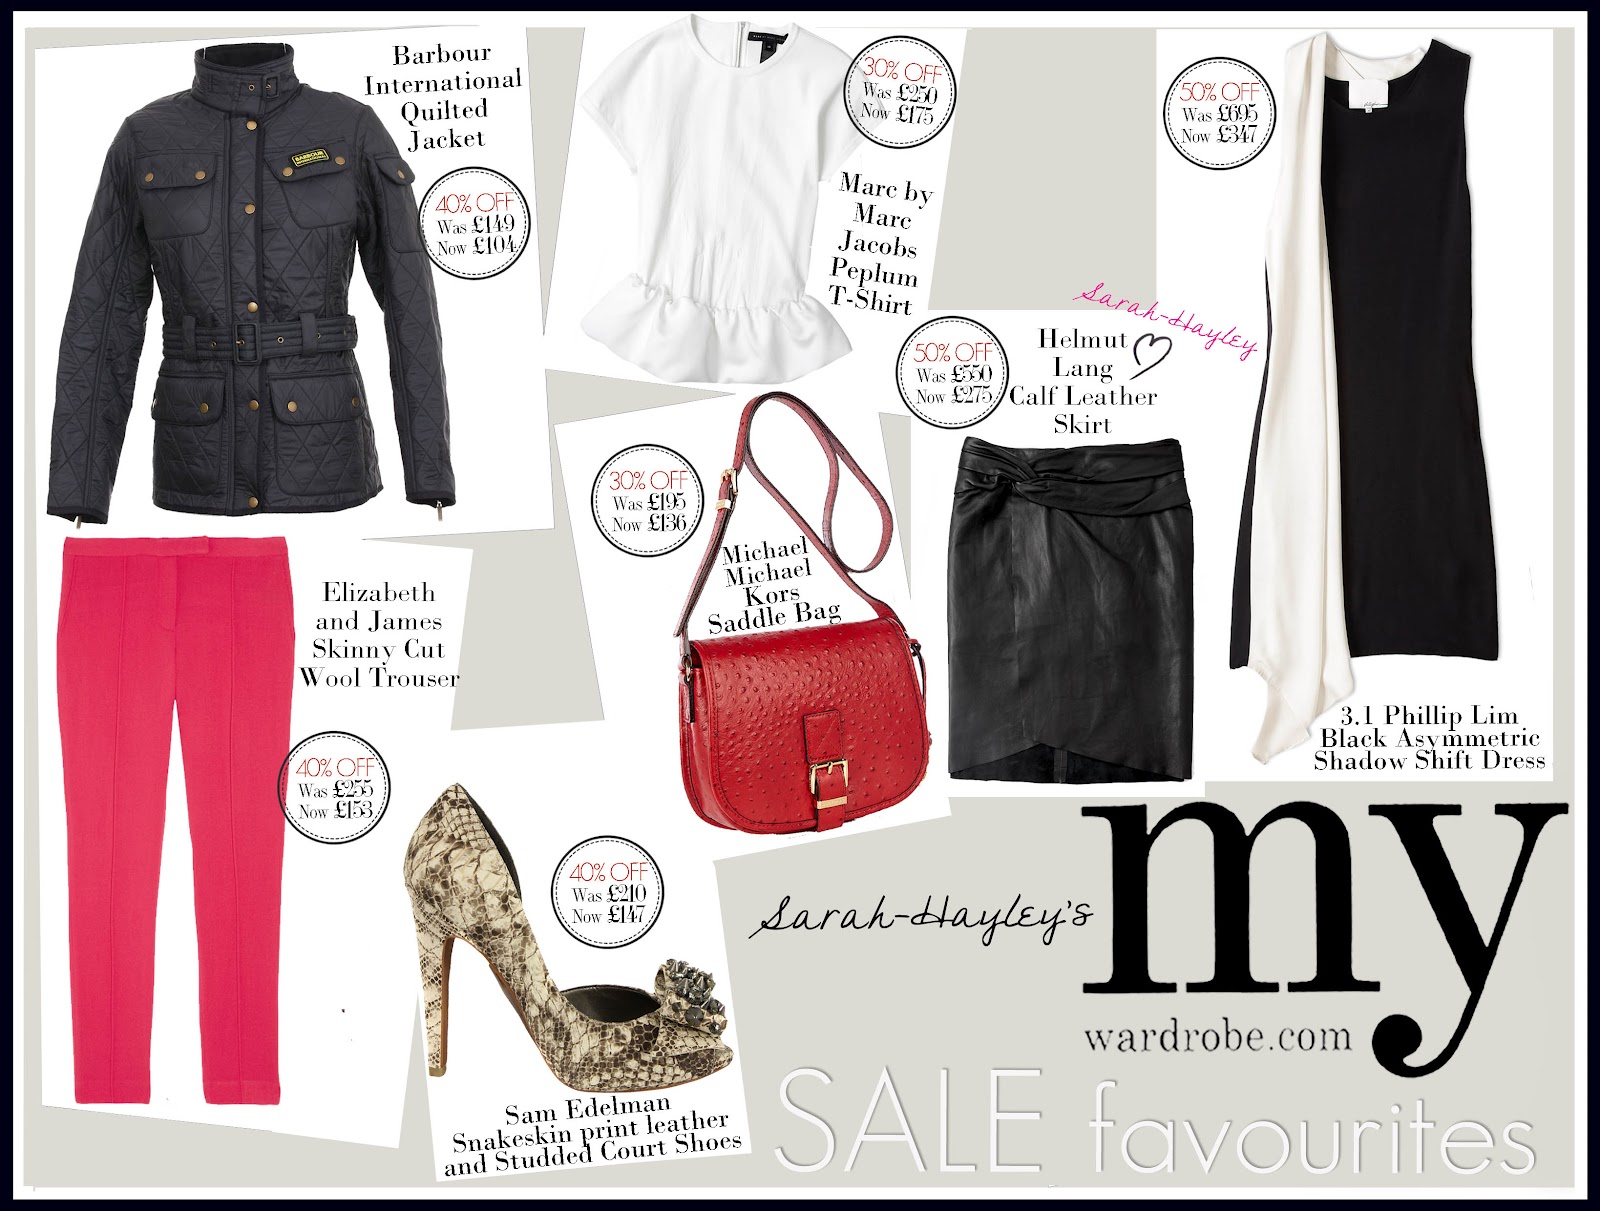 Shop the Sale - The My Wardrobe sale has started! - by Sarah-Hayley Owen